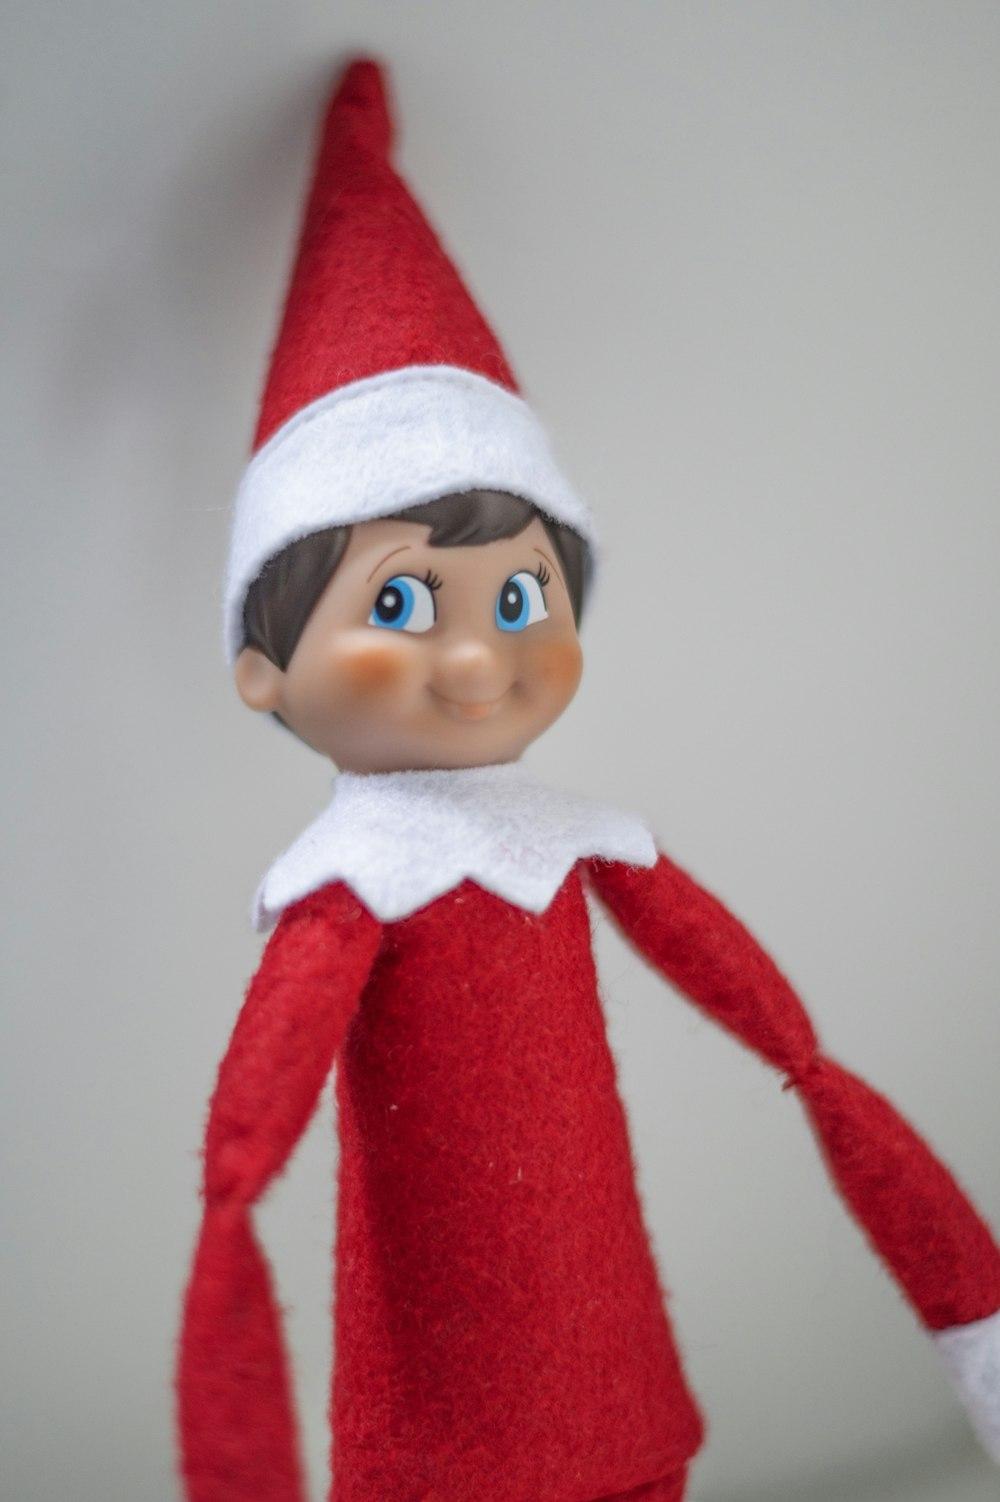 🔥 Free download Elf On The Shelf Pictures Download Free Images on ...